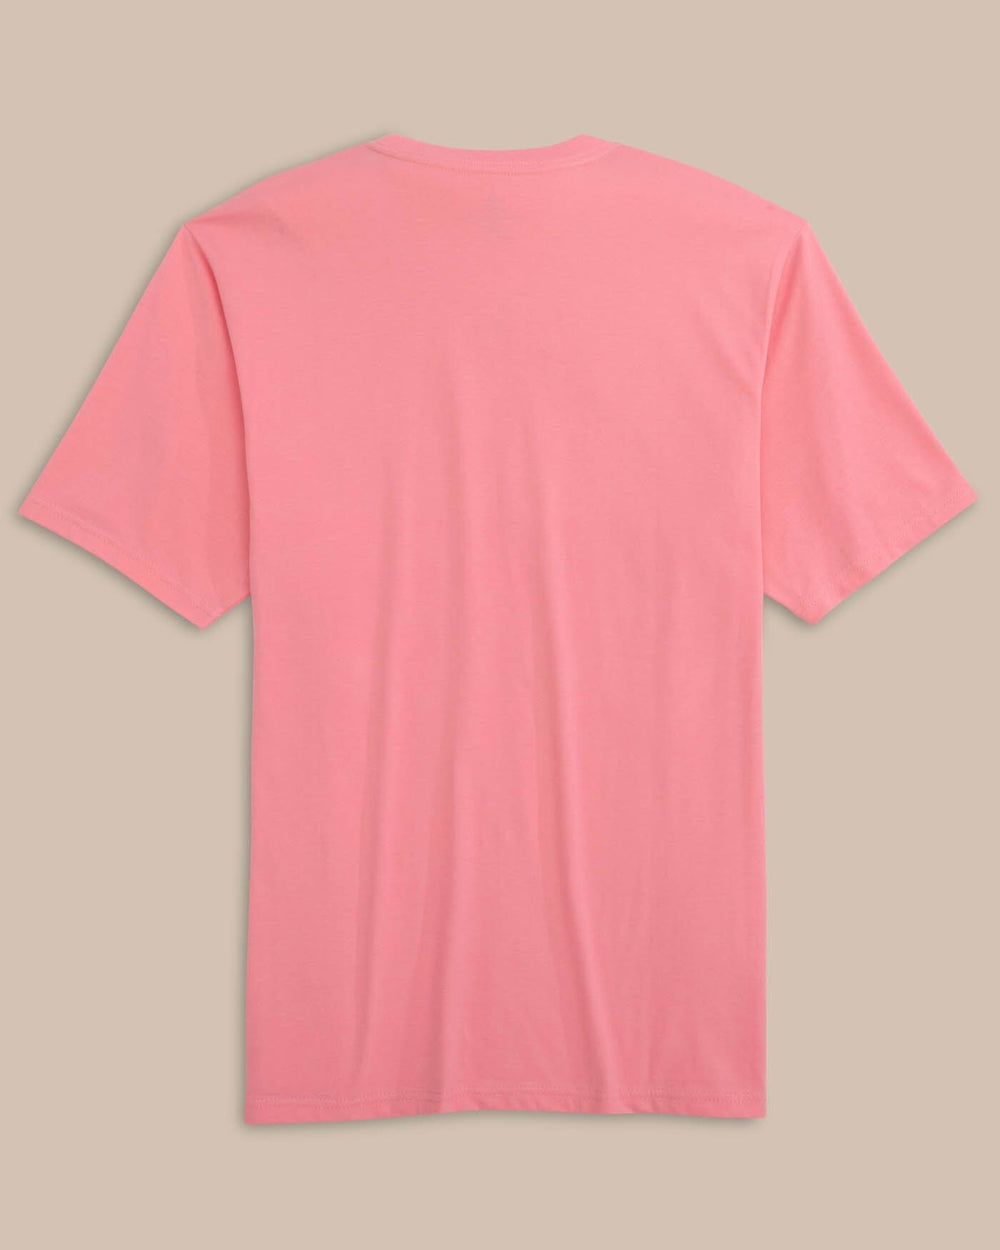 The back view of the Southern Tide Across the Chest Skipjack Short Sleeve T-Shirt by Southern Tide - Geranium Pink